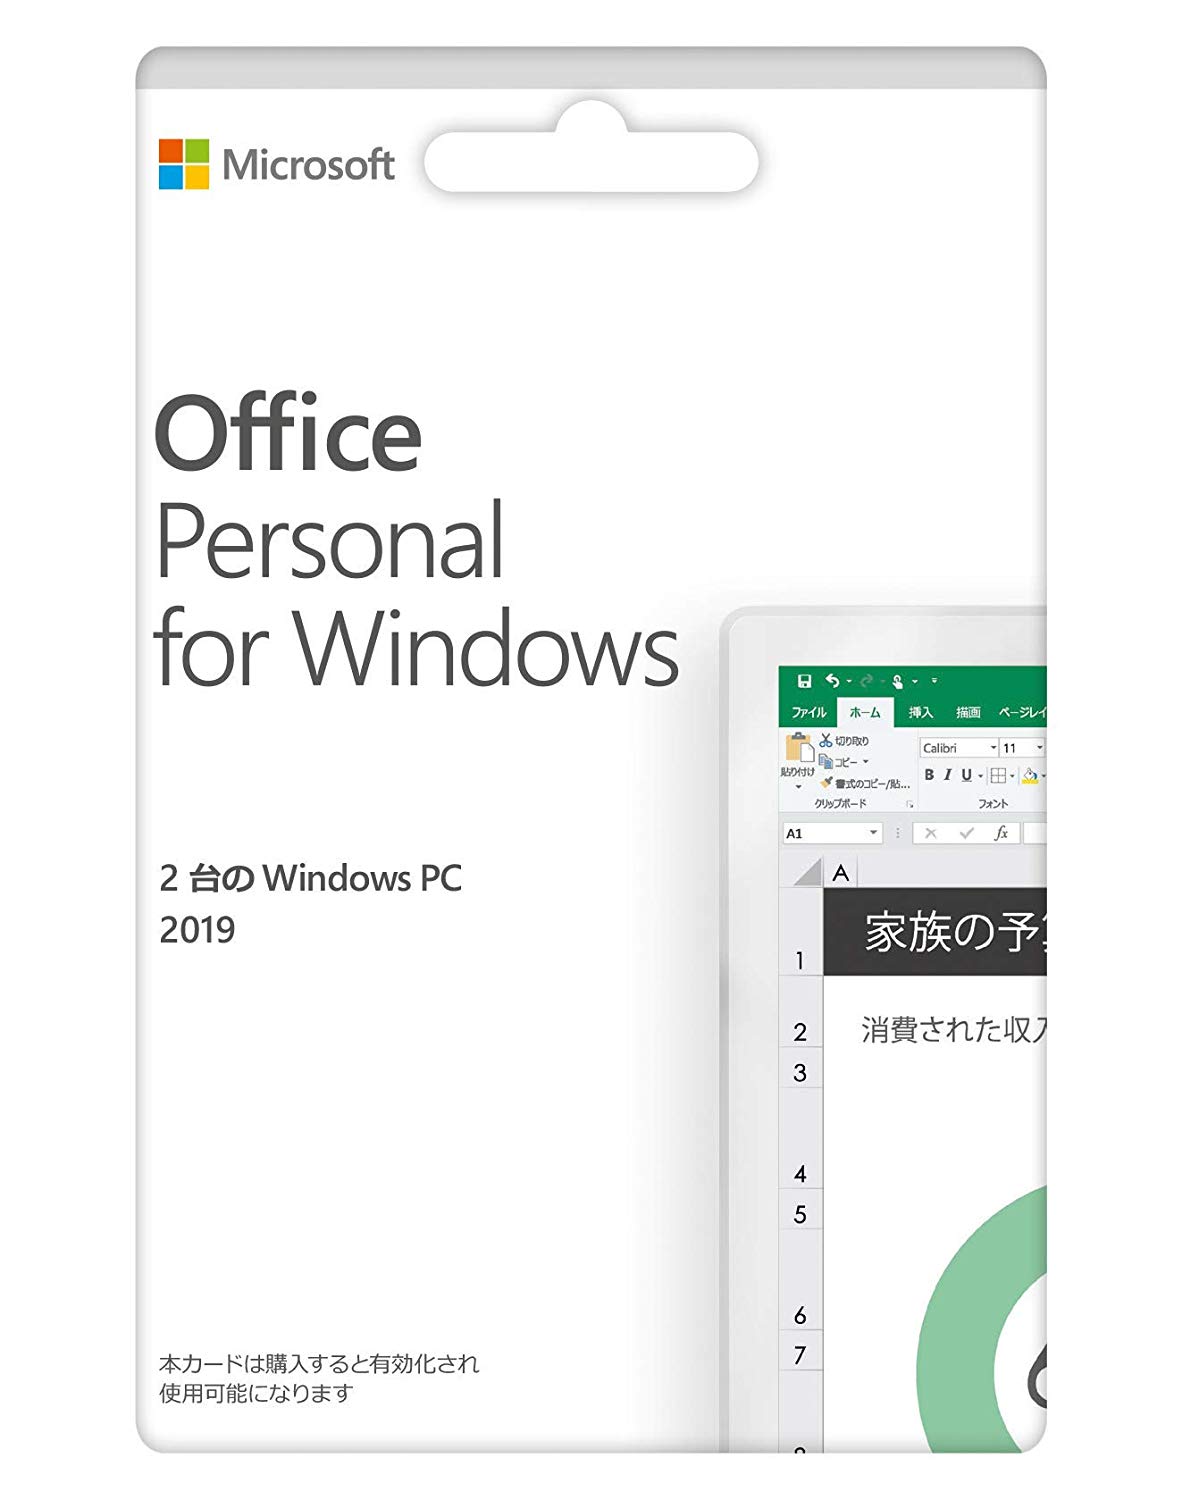 Microsoft Office Personal for Windows